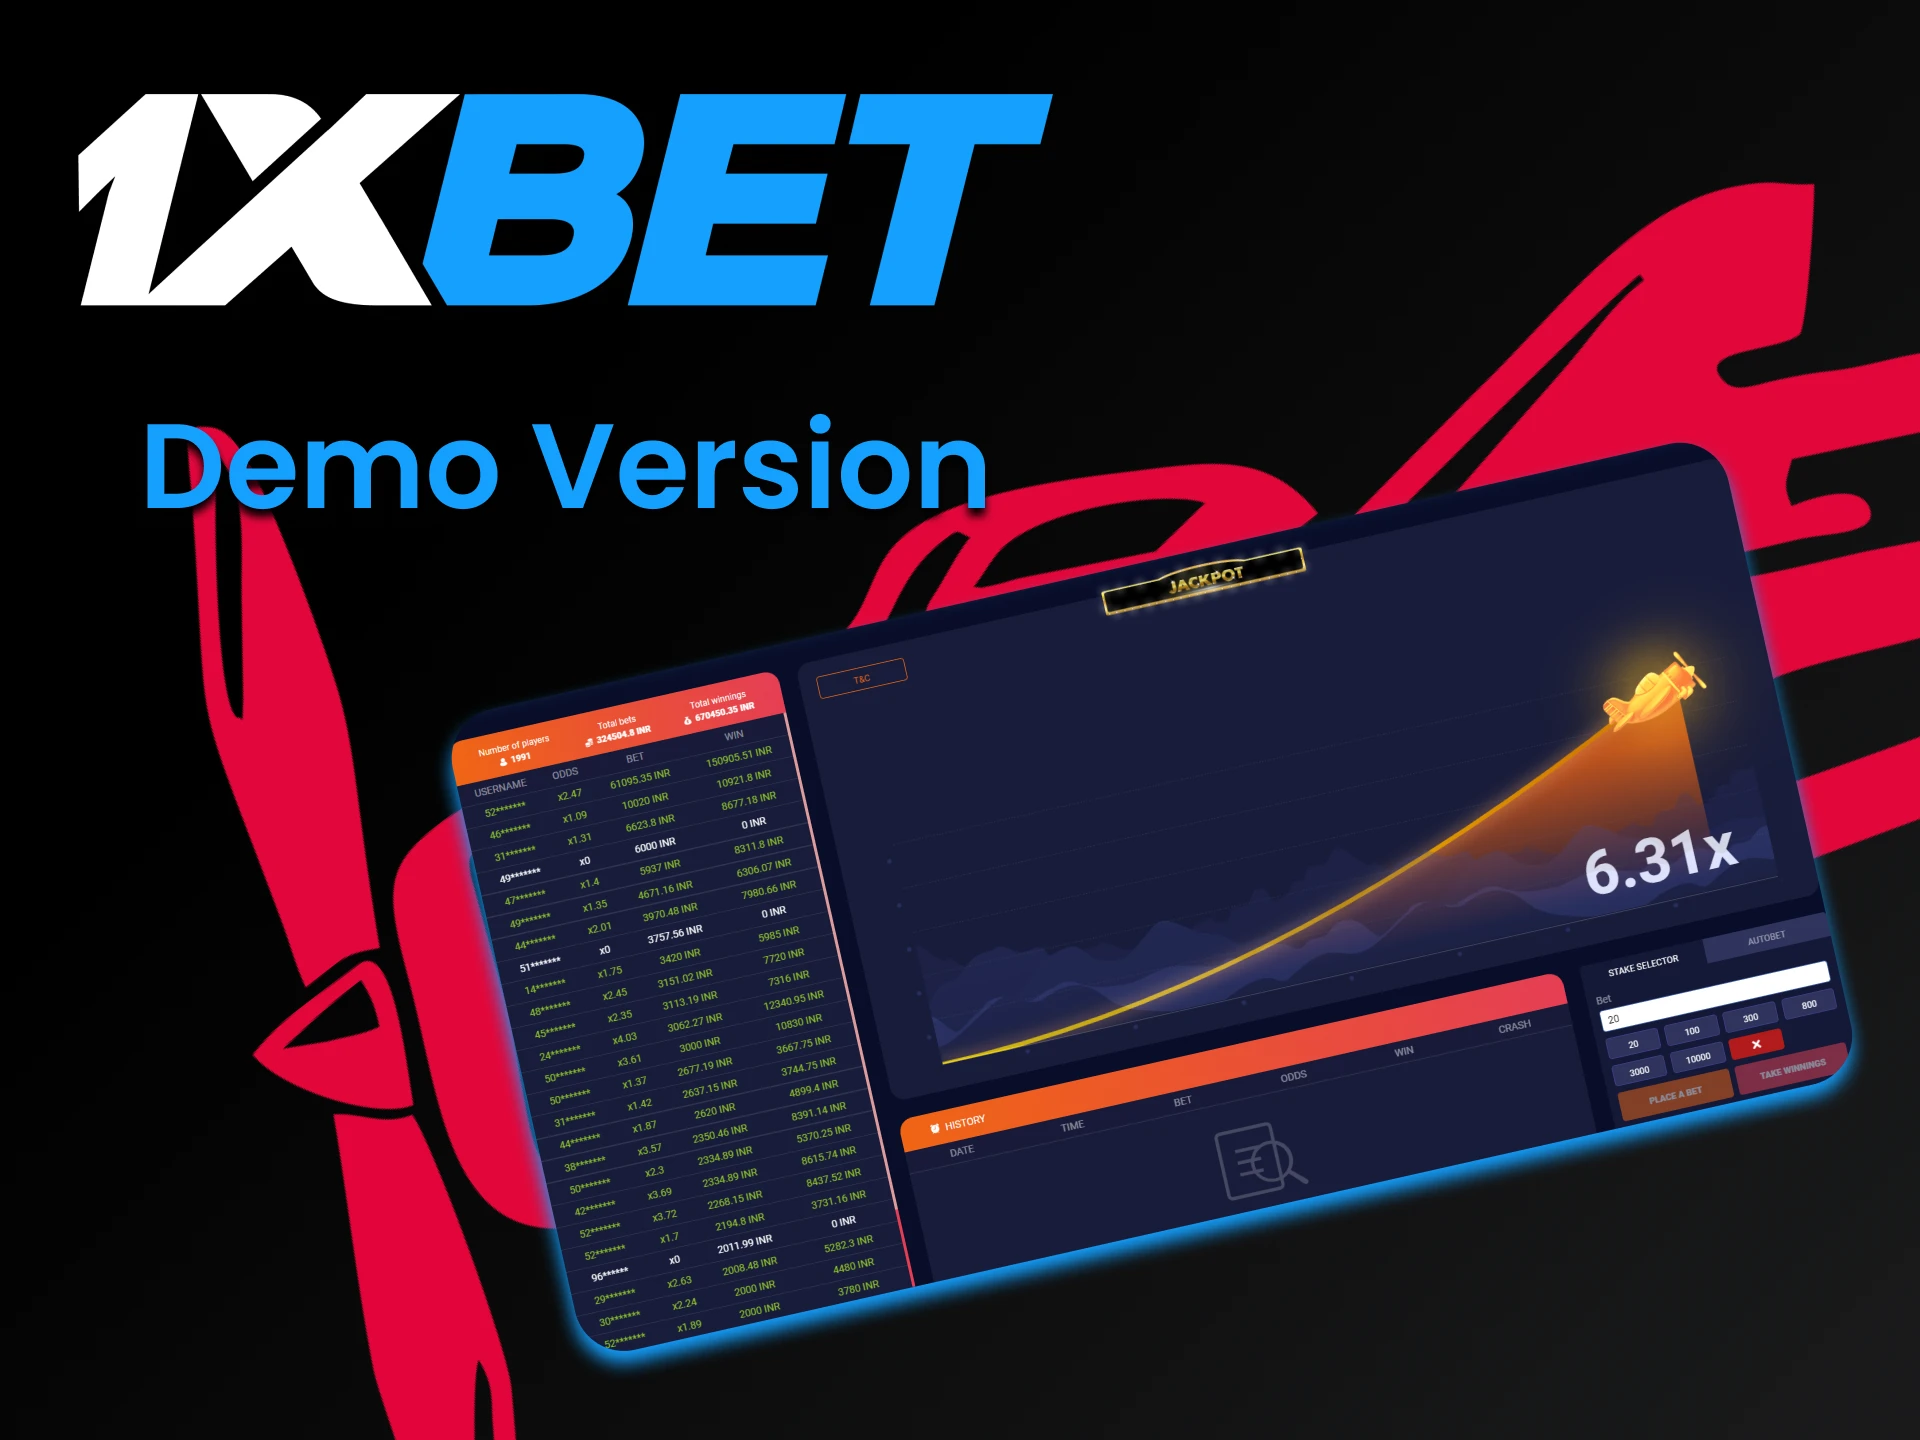 Before playing for real money, you can practice in a special version of the Aviator game from 1xbet.